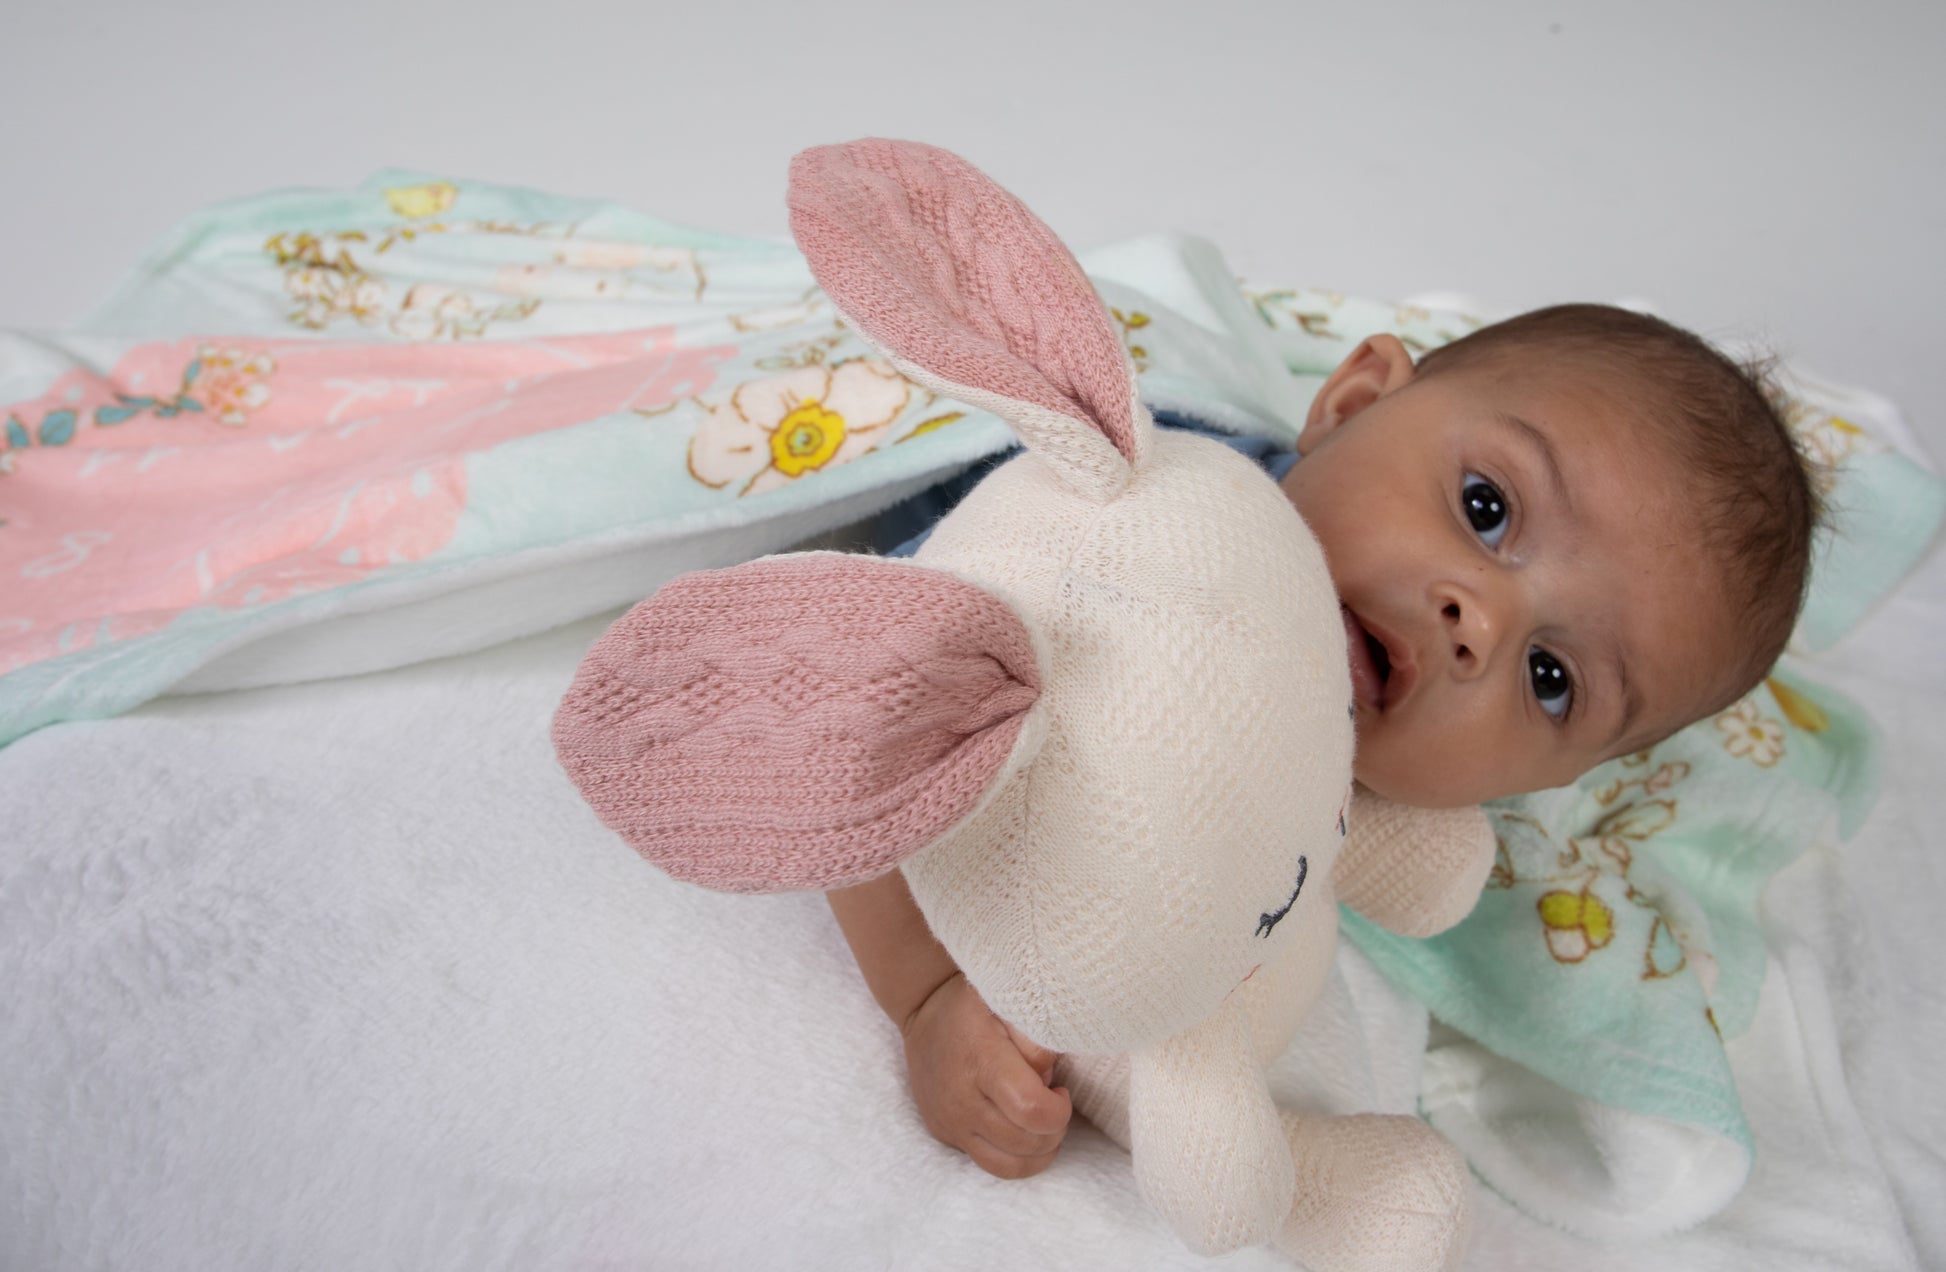 This Stuffed Bunny isn't just for cuddles; it's a versatile companion. Whether it's used as a bedtime buddy, a decorative accent in a nursery, or a loyal travel companion, it will always bring comfort and joy.